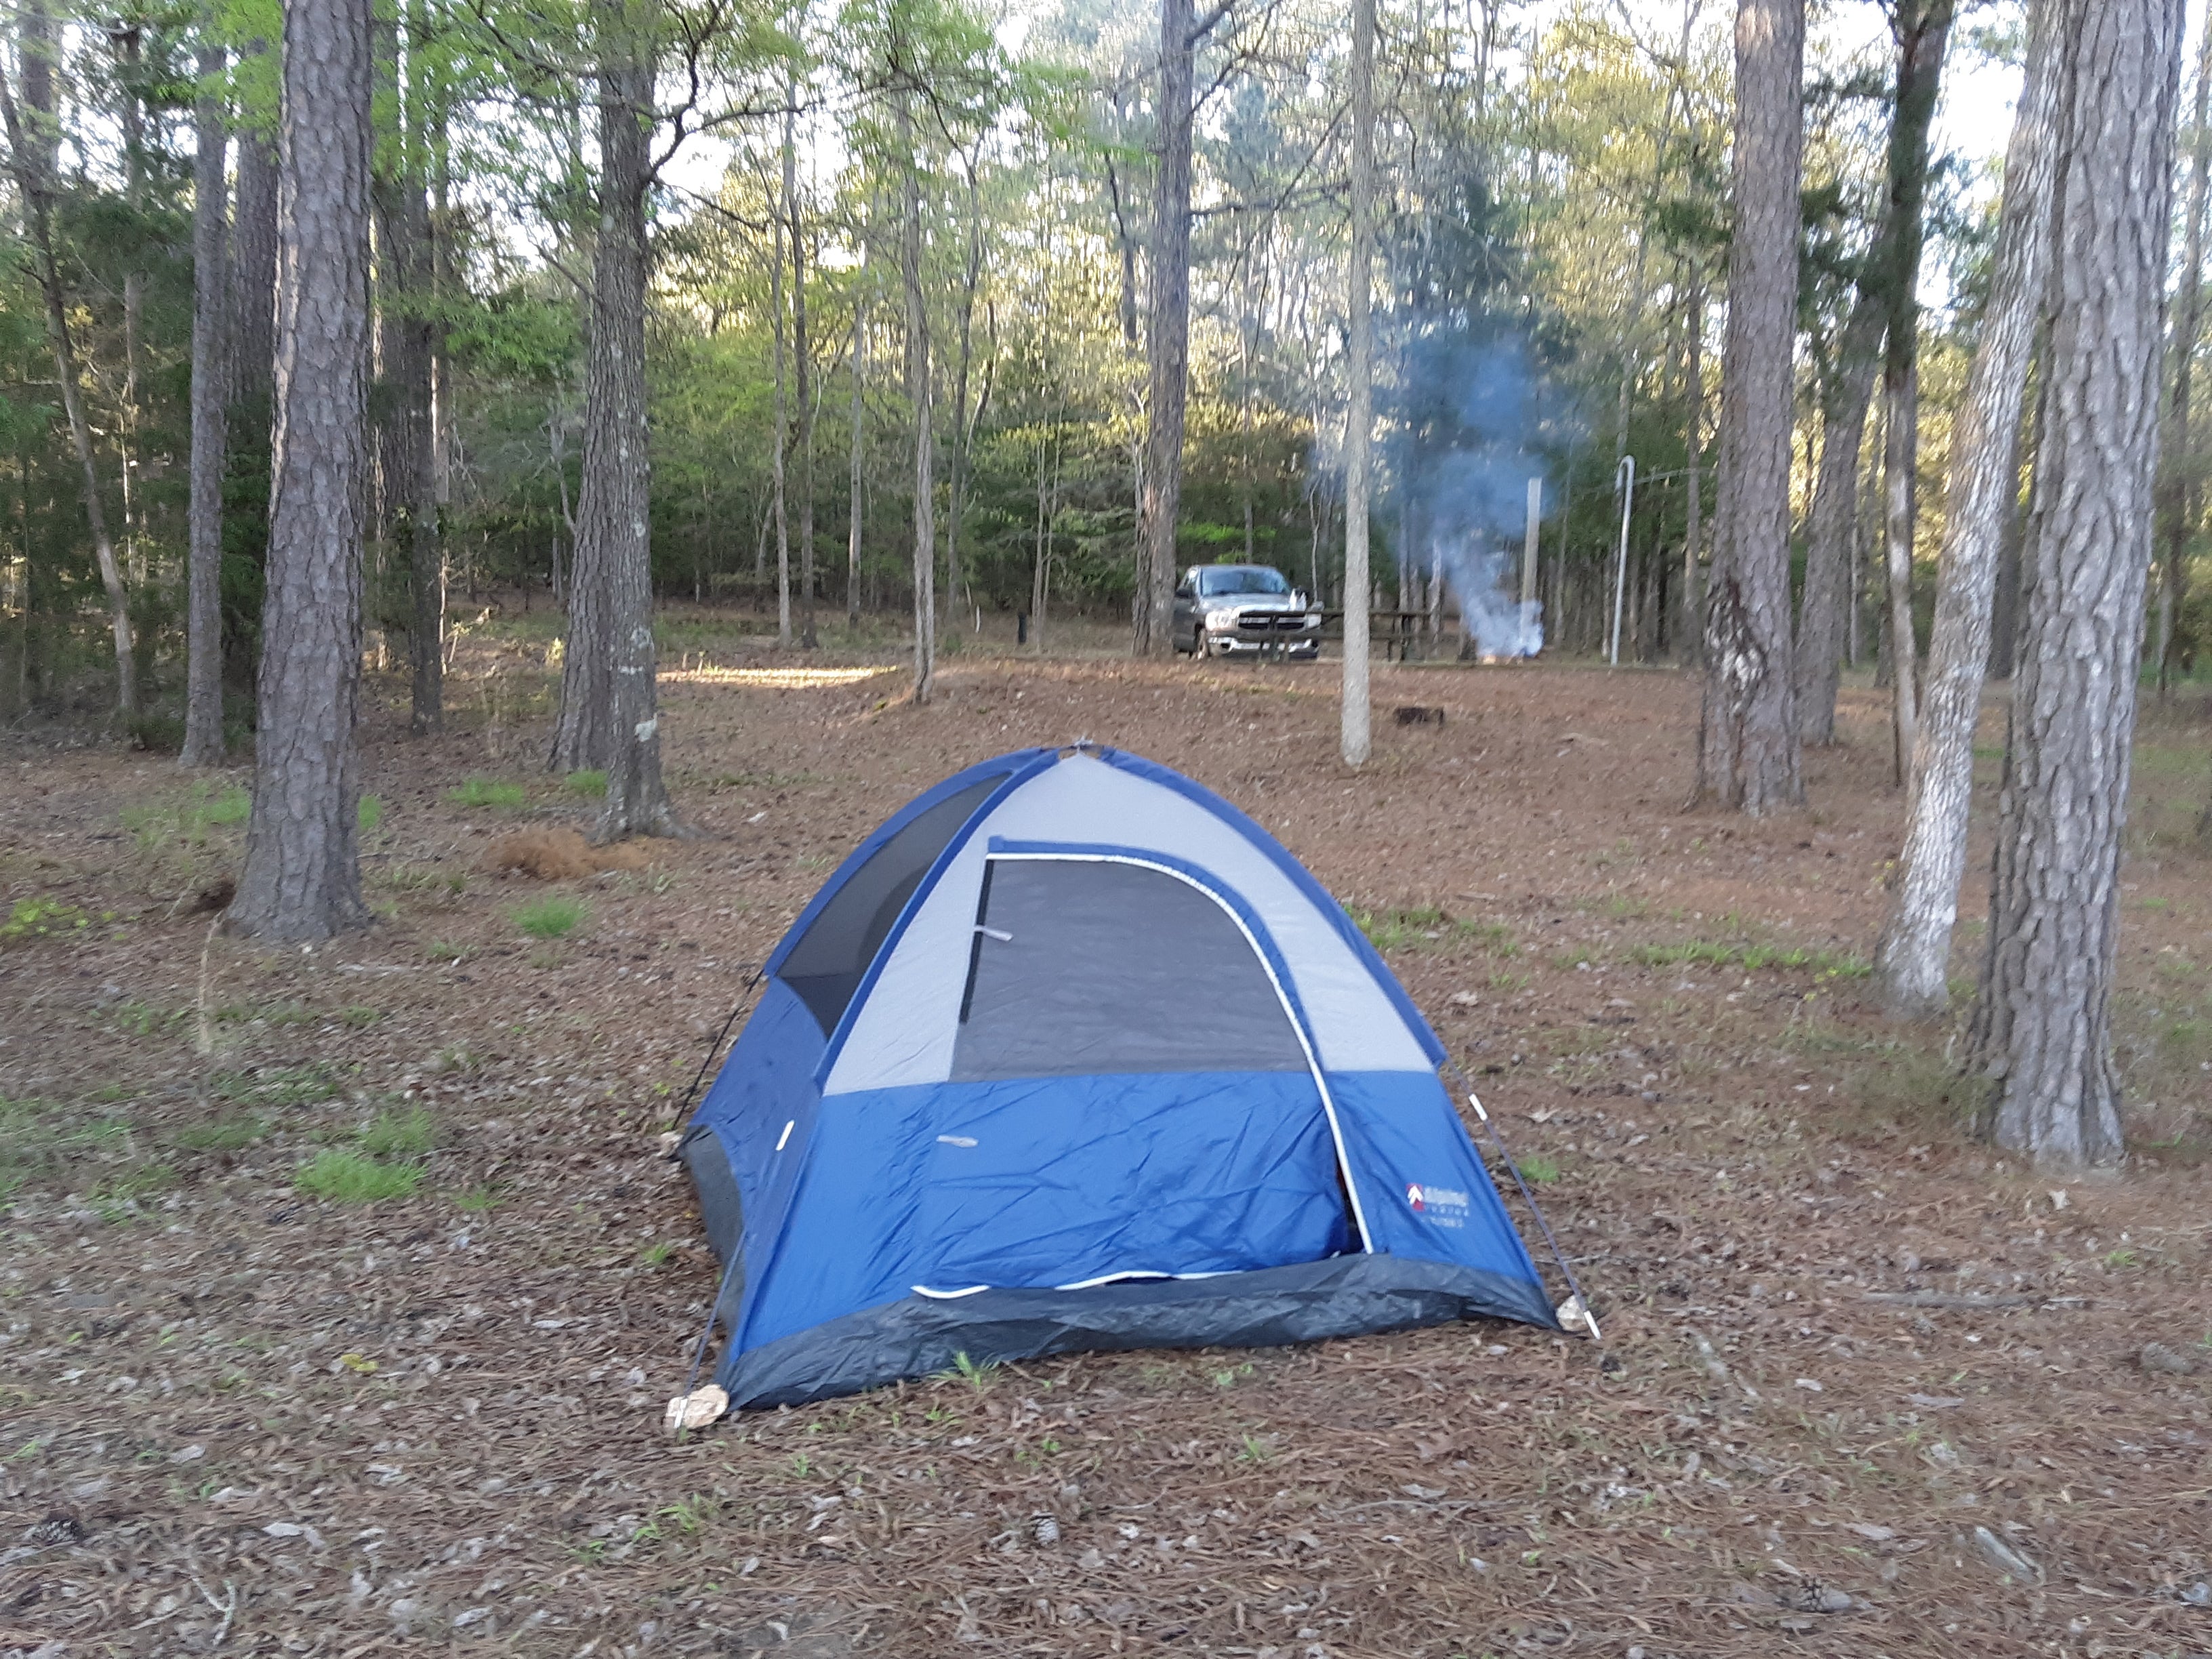 Camper submitted image from Bussey Point Wilderness Area - 5